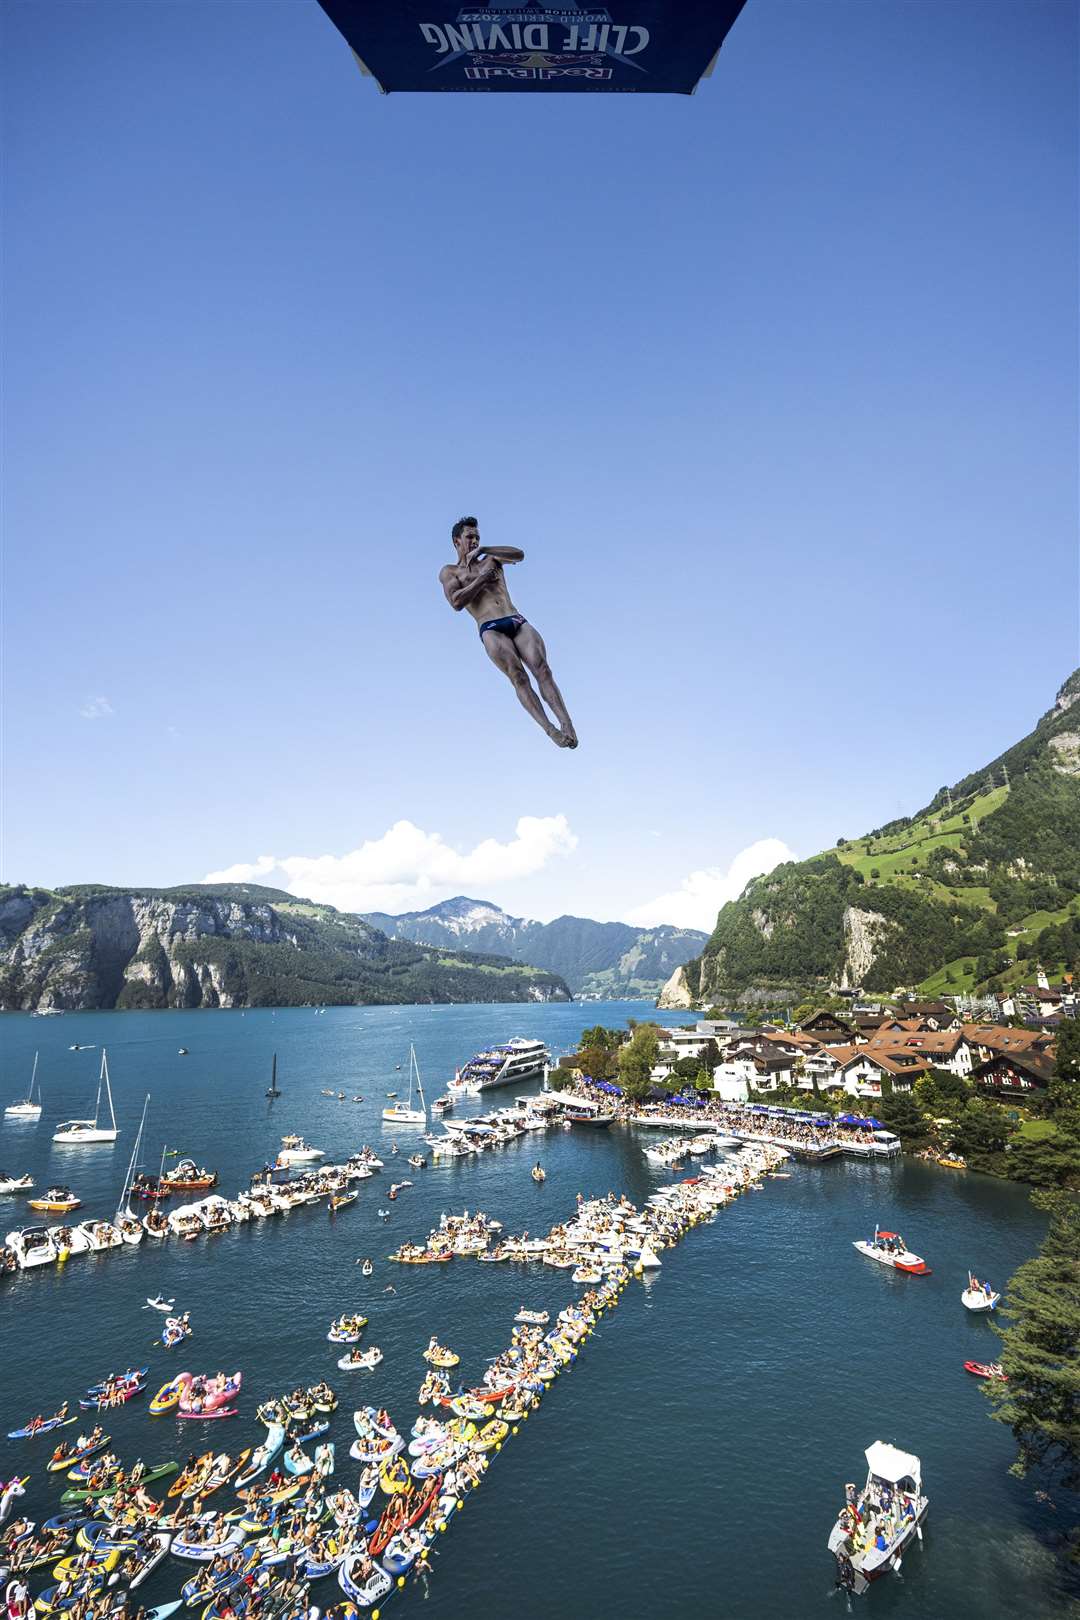 Aidan Heslop is one of the favourites to win in the Red Bull Cliff Diving World Series (Romina Amato/Red Bull/PA)